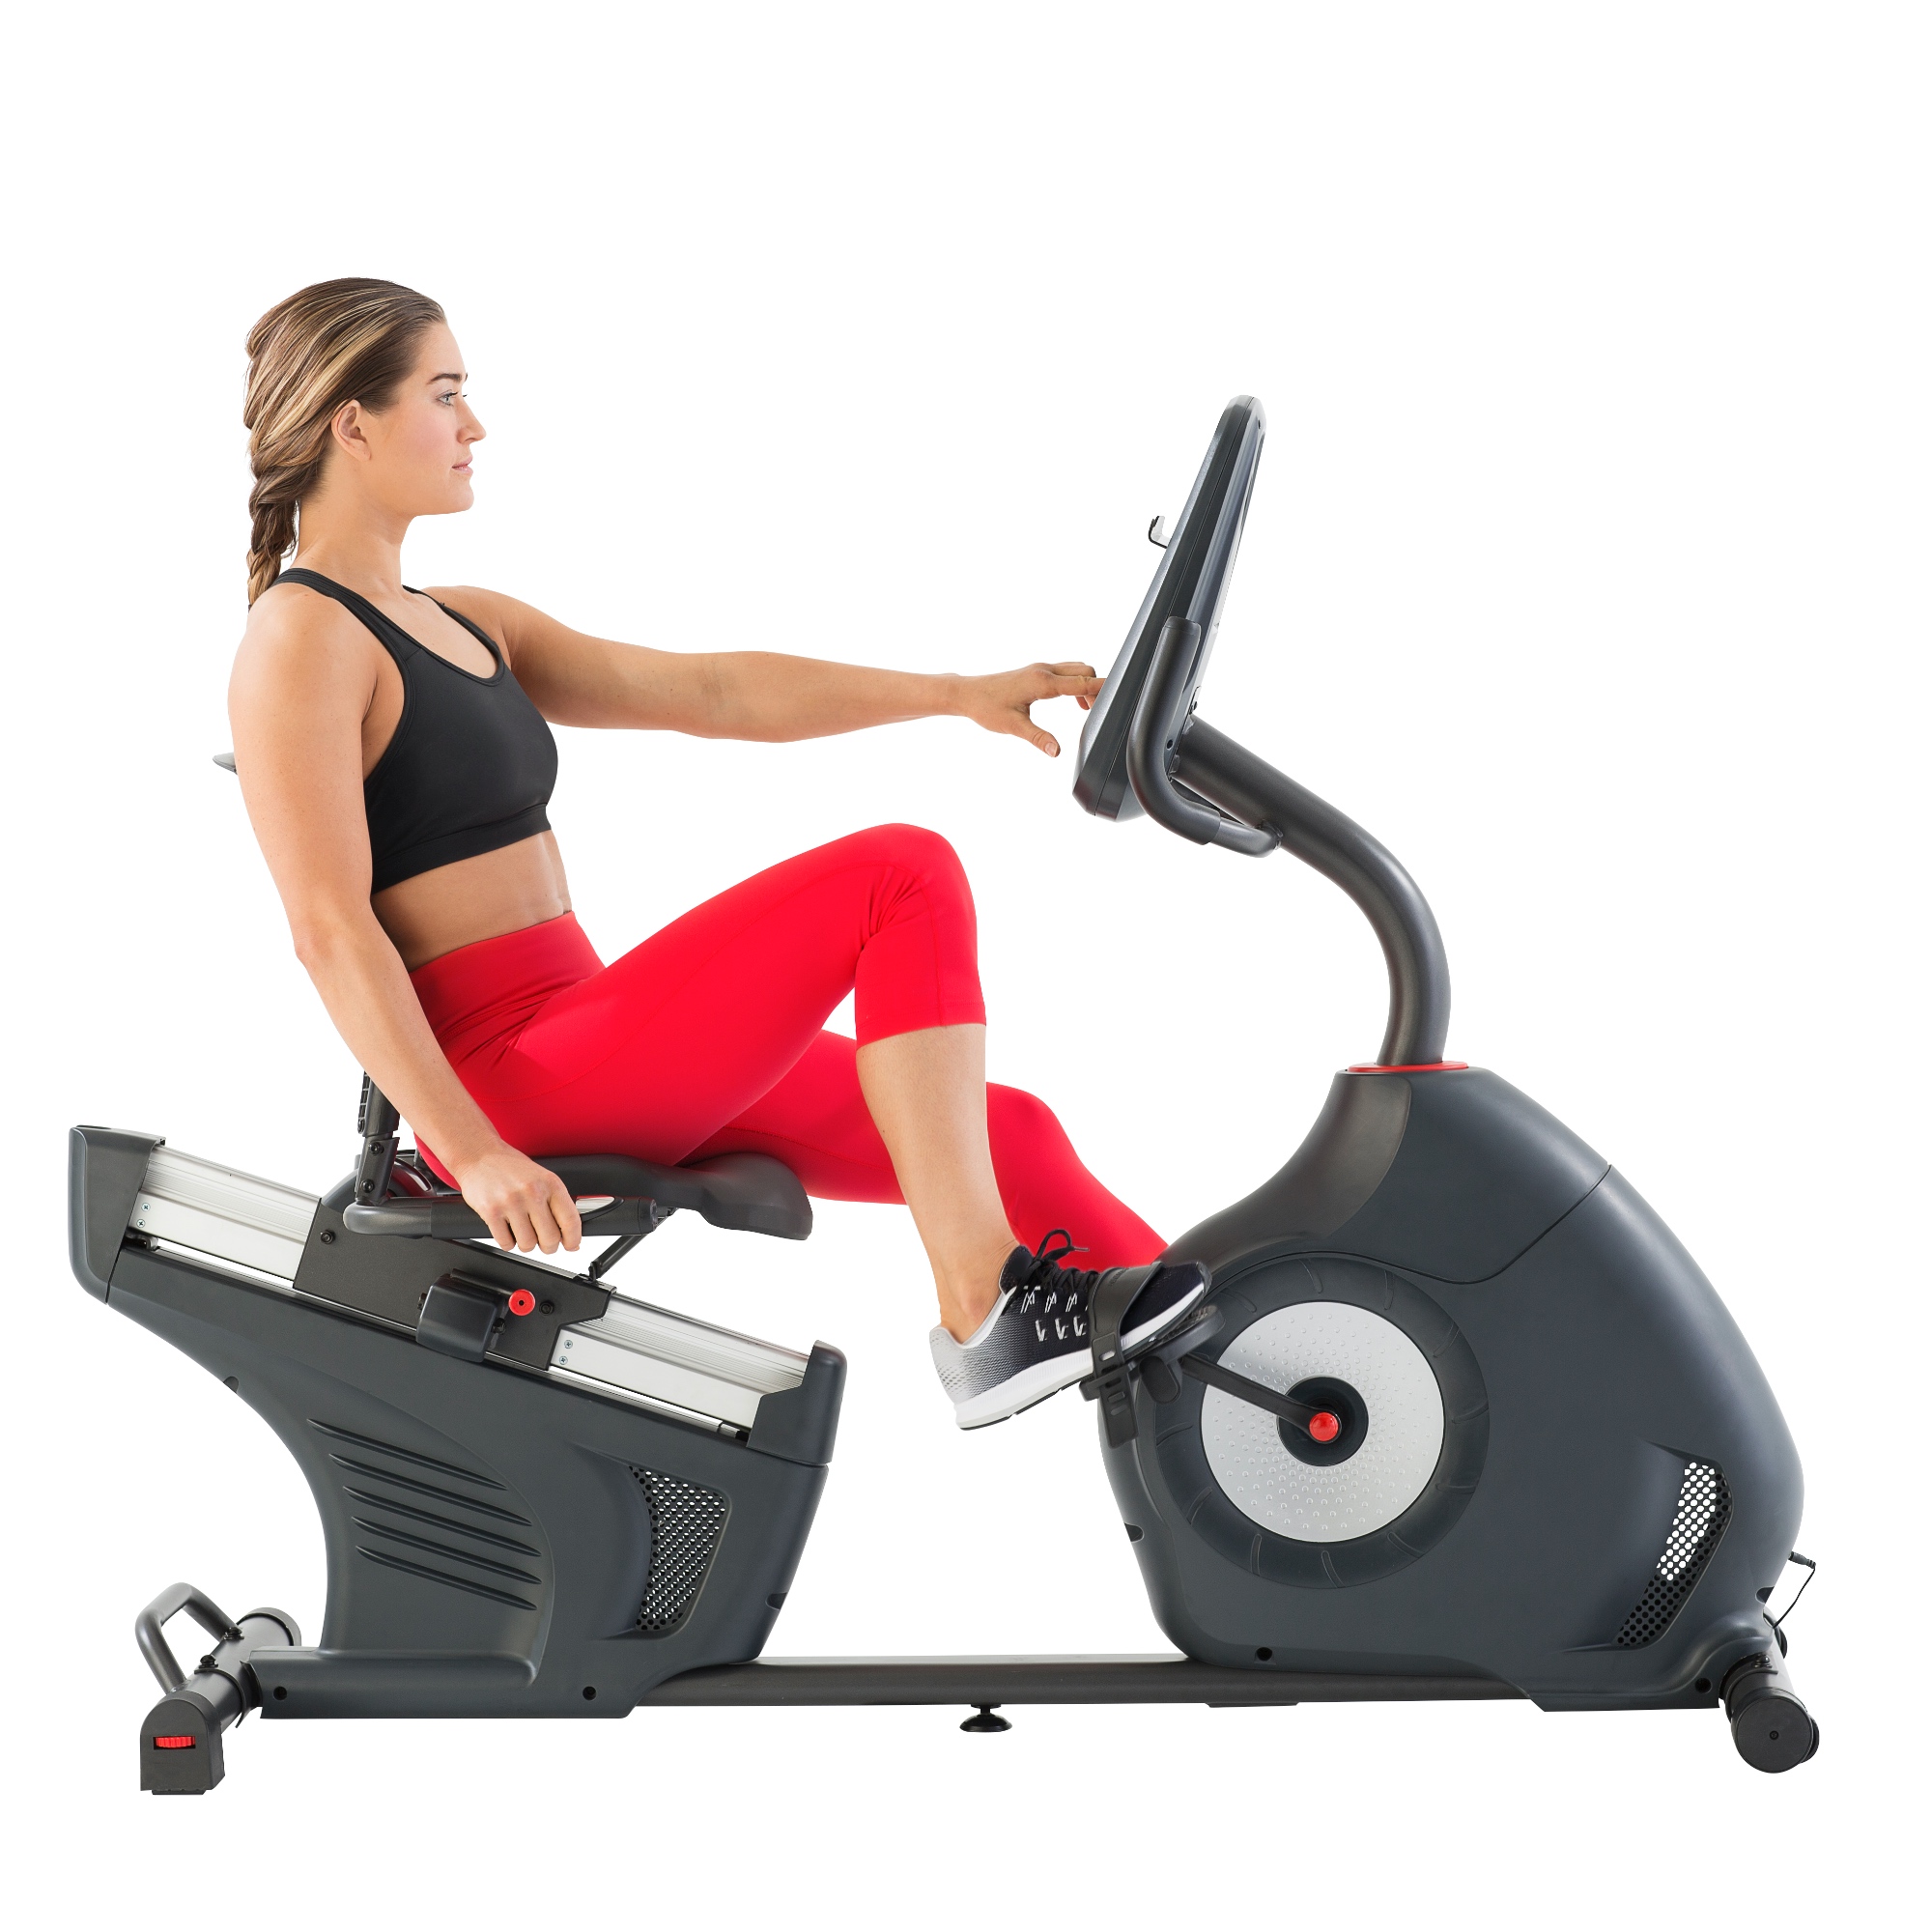 Schwinn 270 Recumbent Exercise Bike with Explore the World Compatibility - image 13 of 14